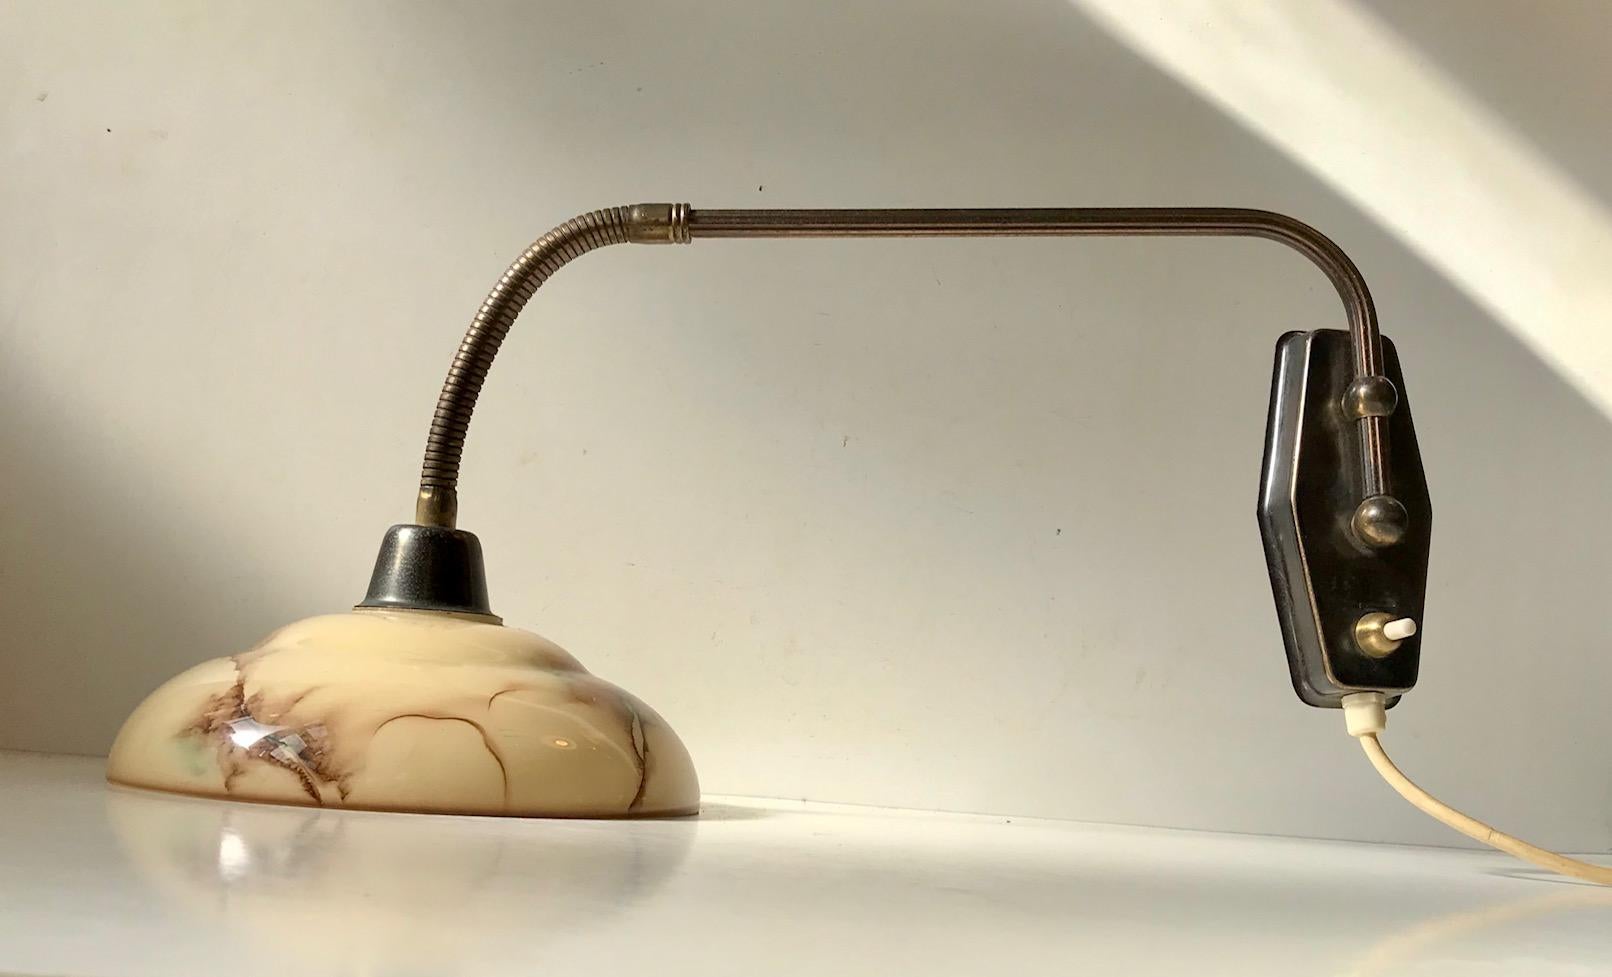 Fully adjustable wall lamp designed and manufactured by Th. Valentiner in Copenhagen, Denmark during the 1950s. It features a marbled glass shade, flexible gooseneck and on/off switch to the wall base.